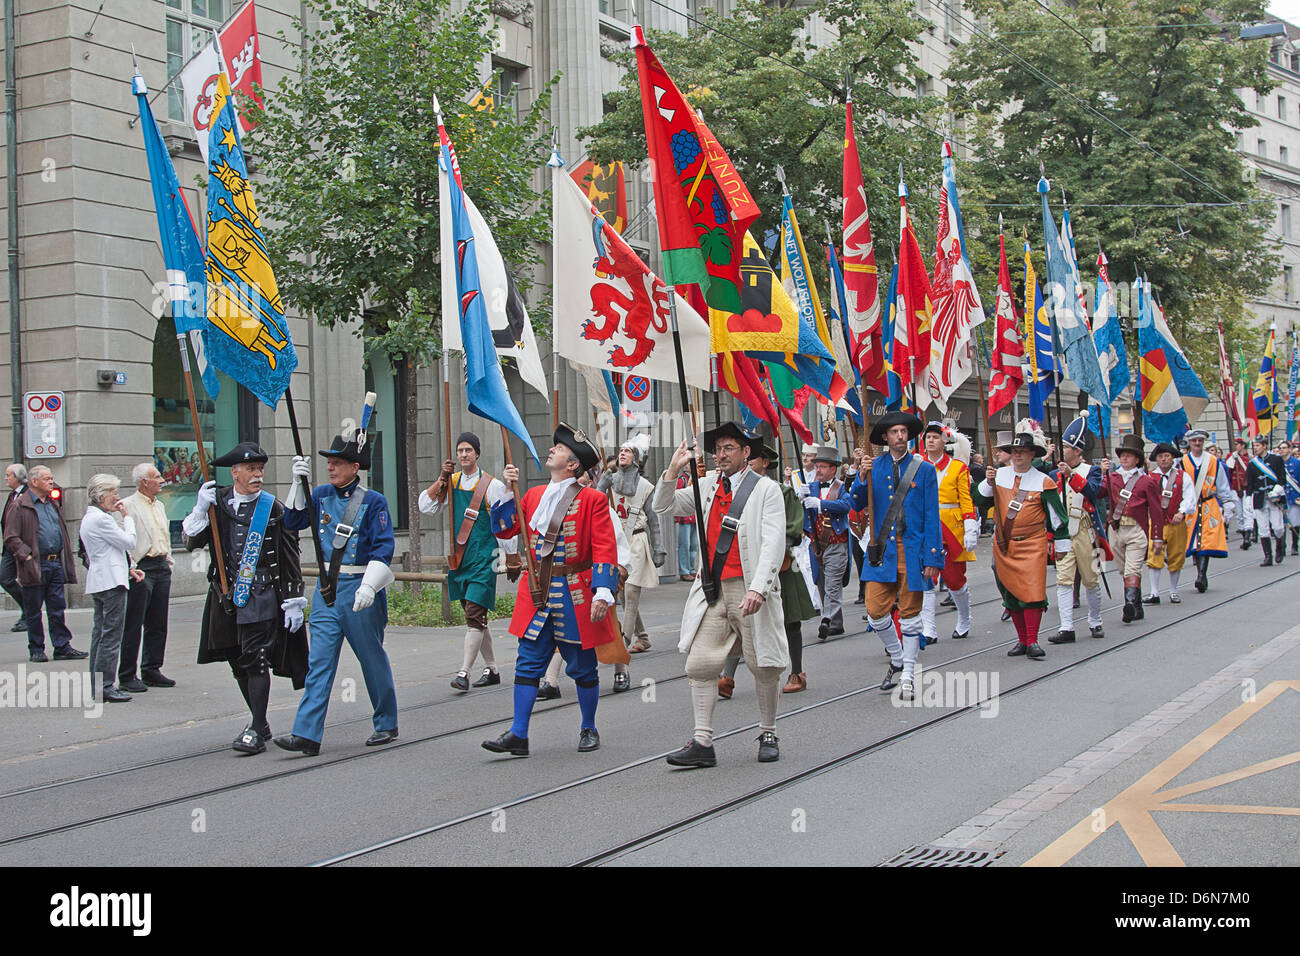 ZURICH - AUGUST 1: Swiss National Day parade on August 1, 2009 in Zurich, Switzerland. Representatives of professional guildes in a historical costumes. Stock Photo